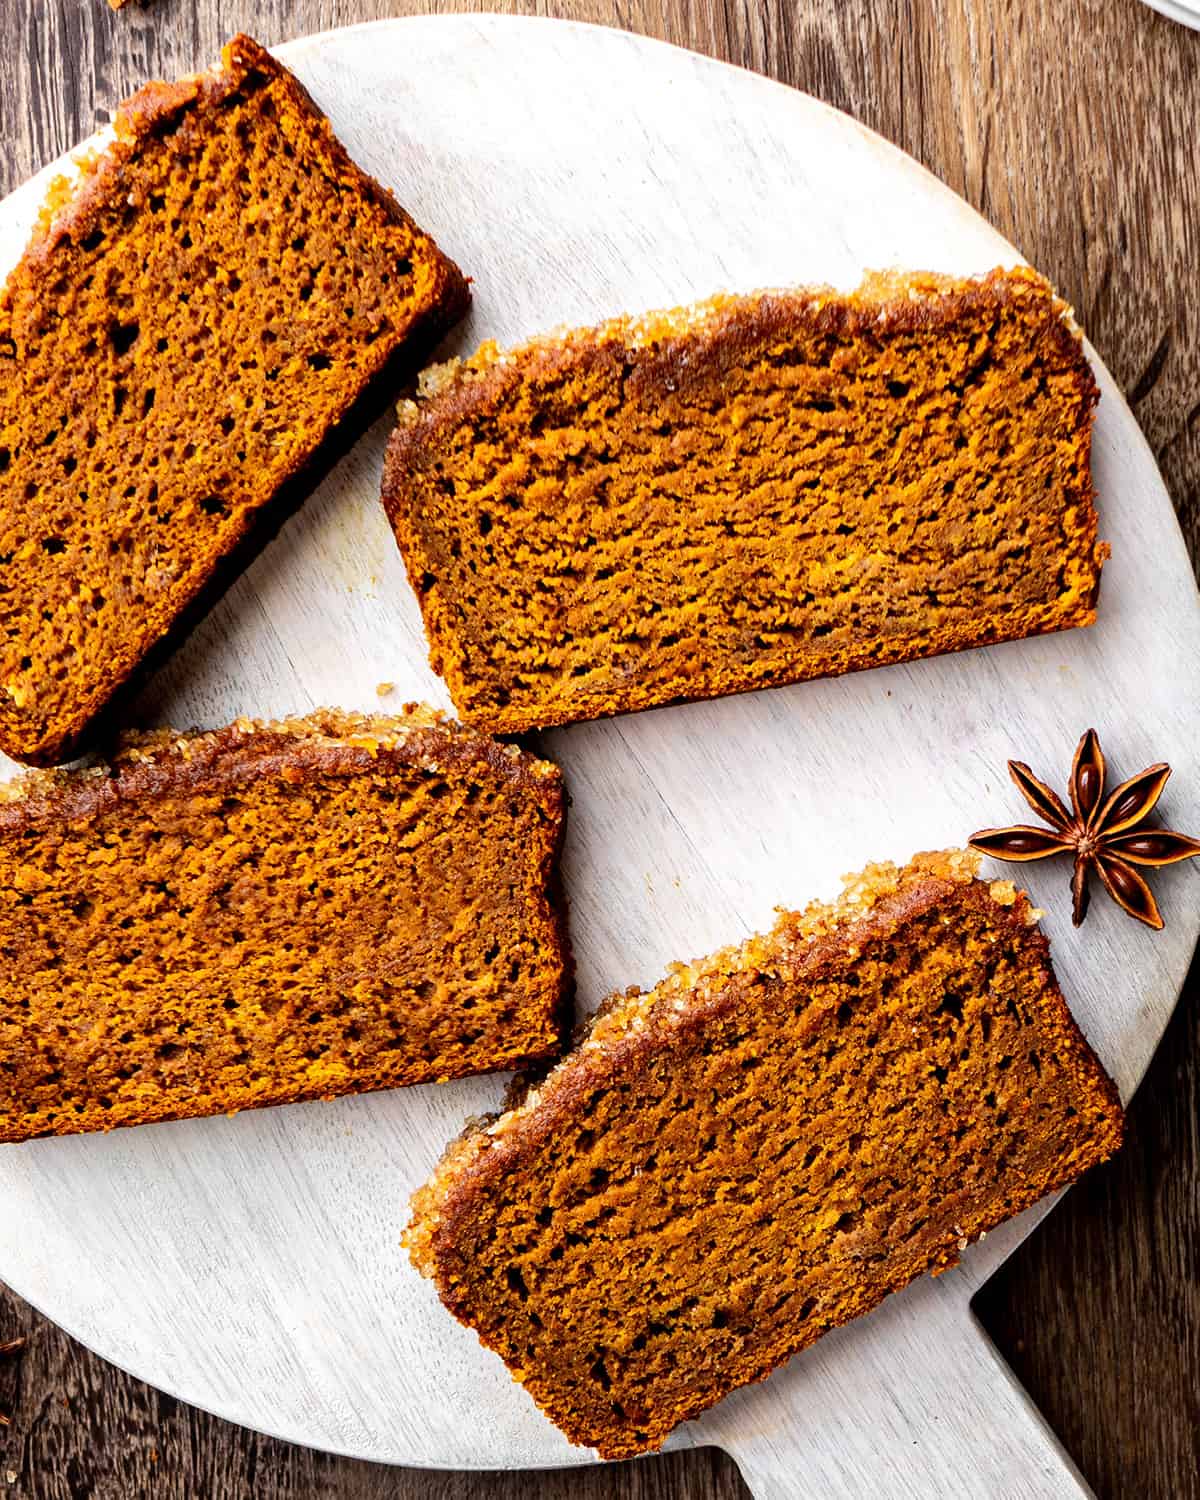 4 slices of Healthy Pumpkin Bread on a serving plate